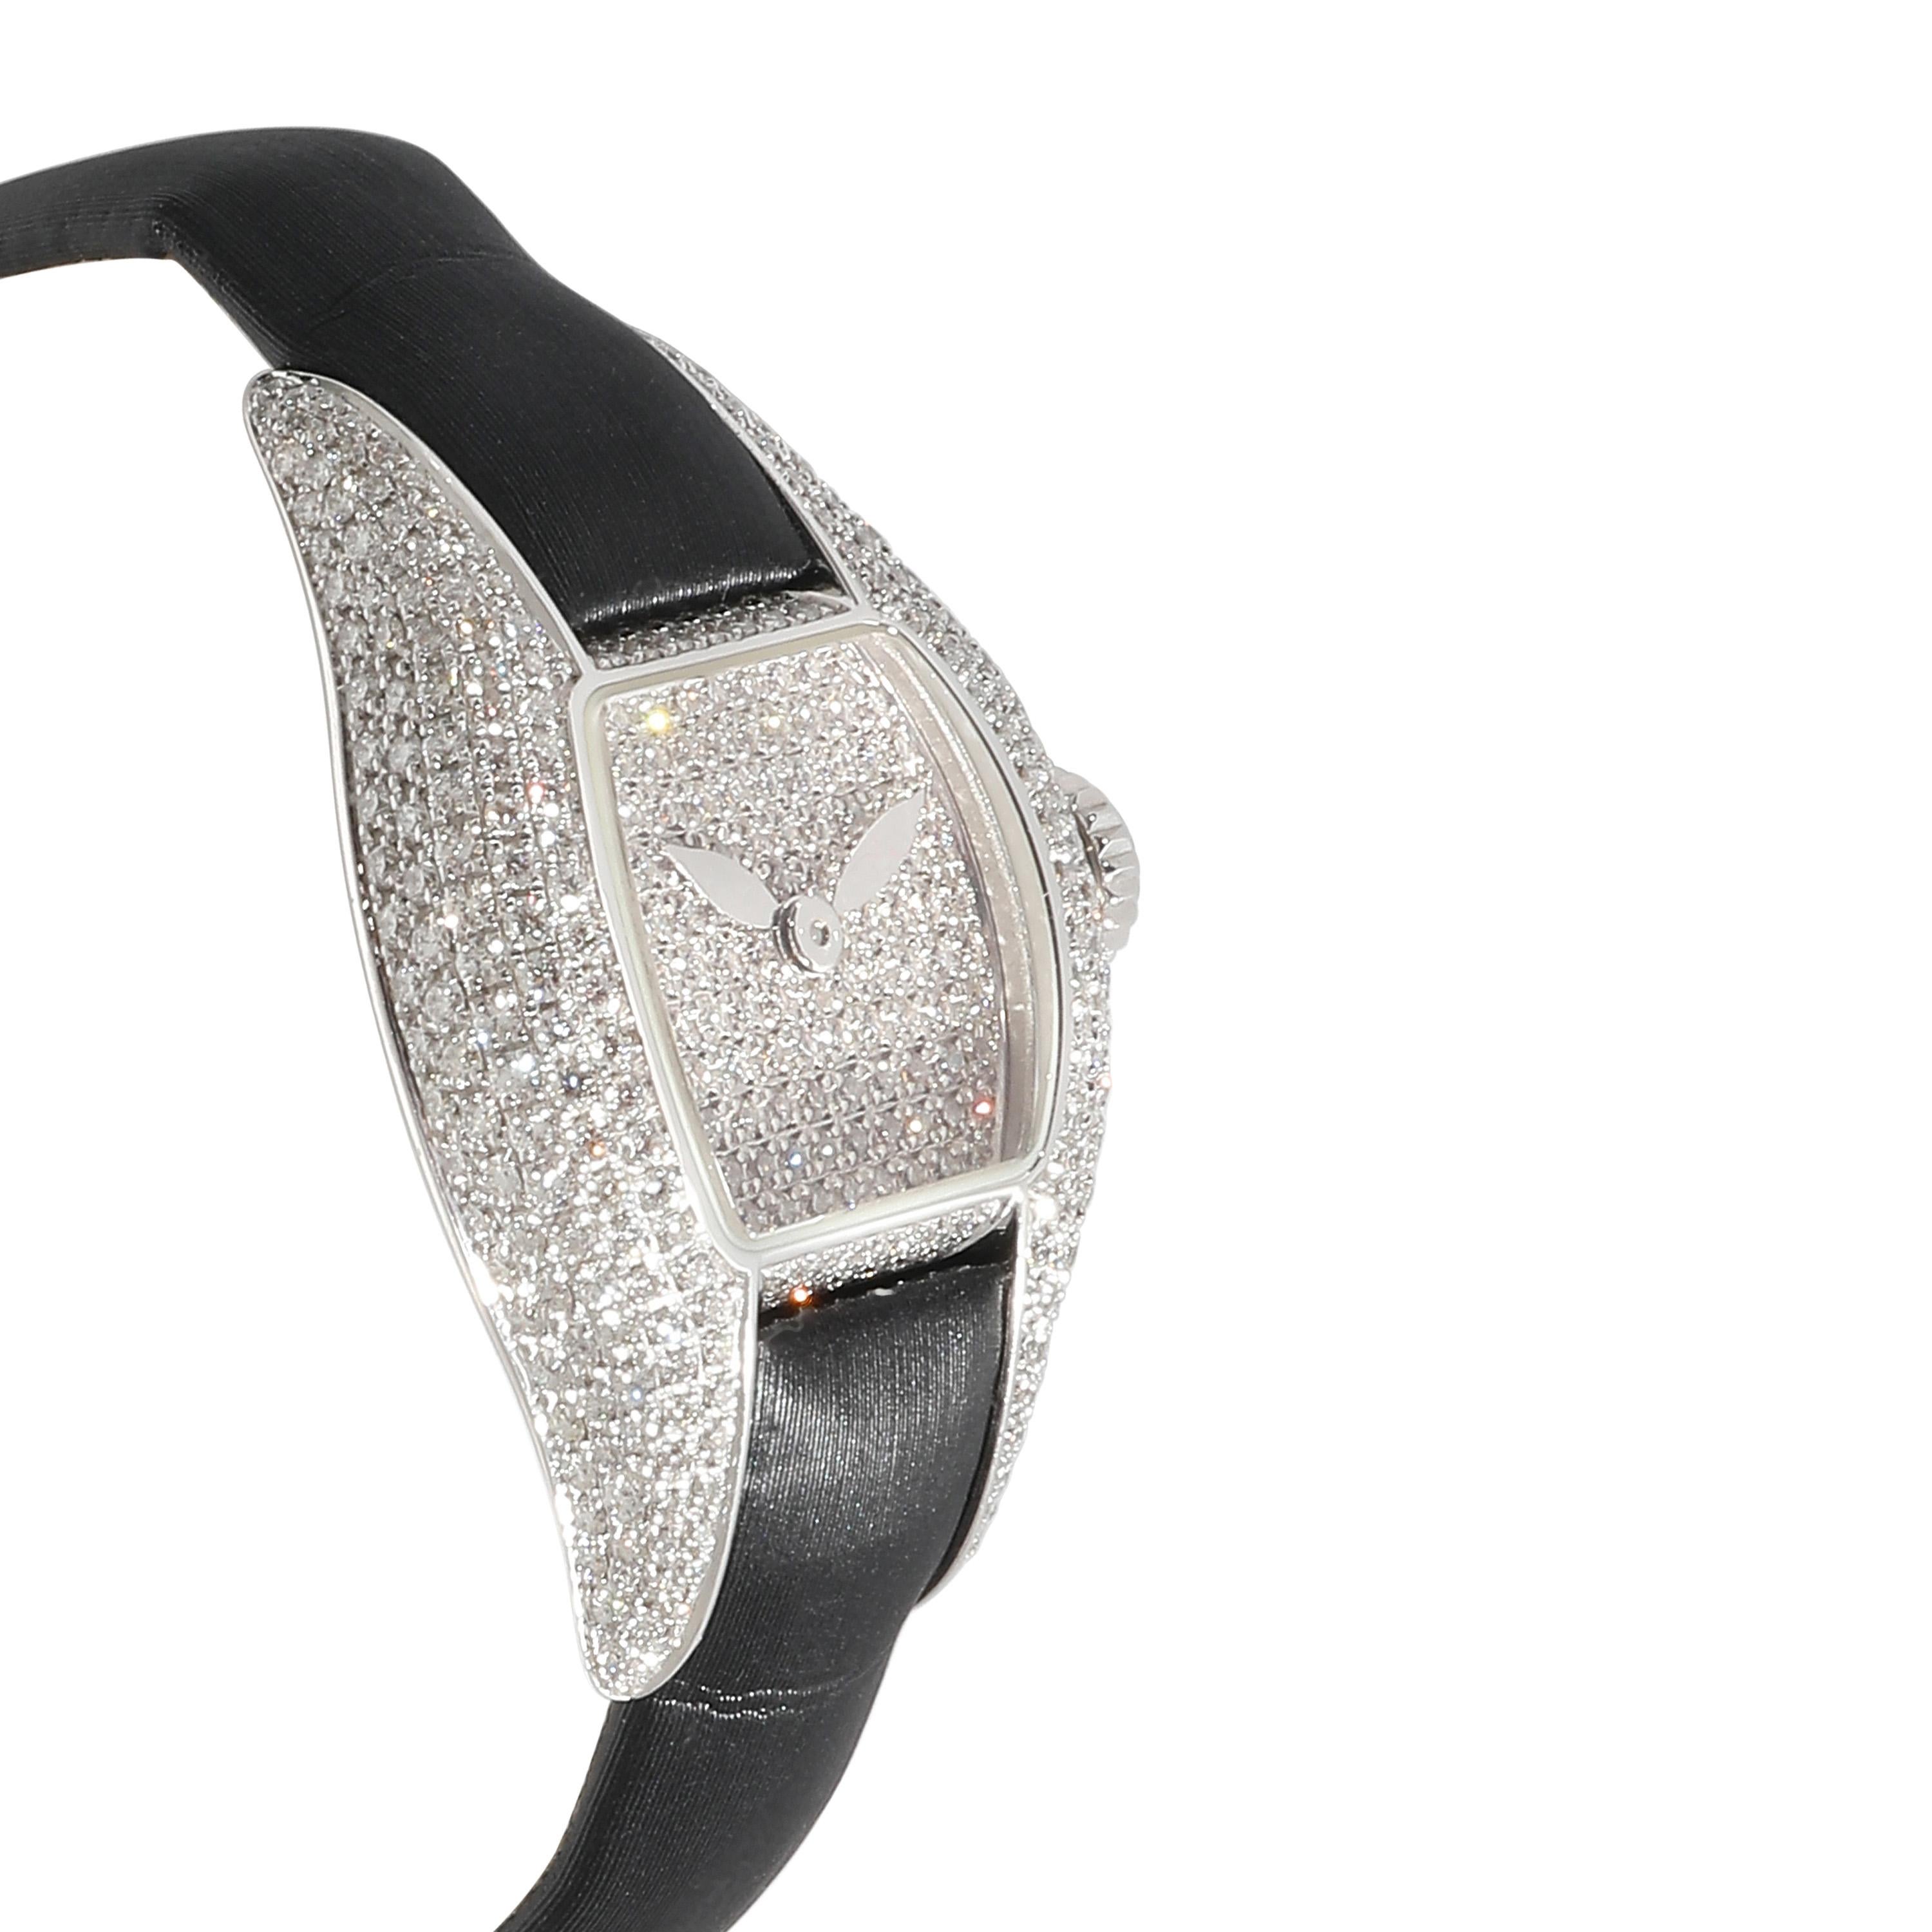 Girard Perregaux  26620 Women's Watch in 18k White Gold In Excellent Condition For Sale In New York, NY